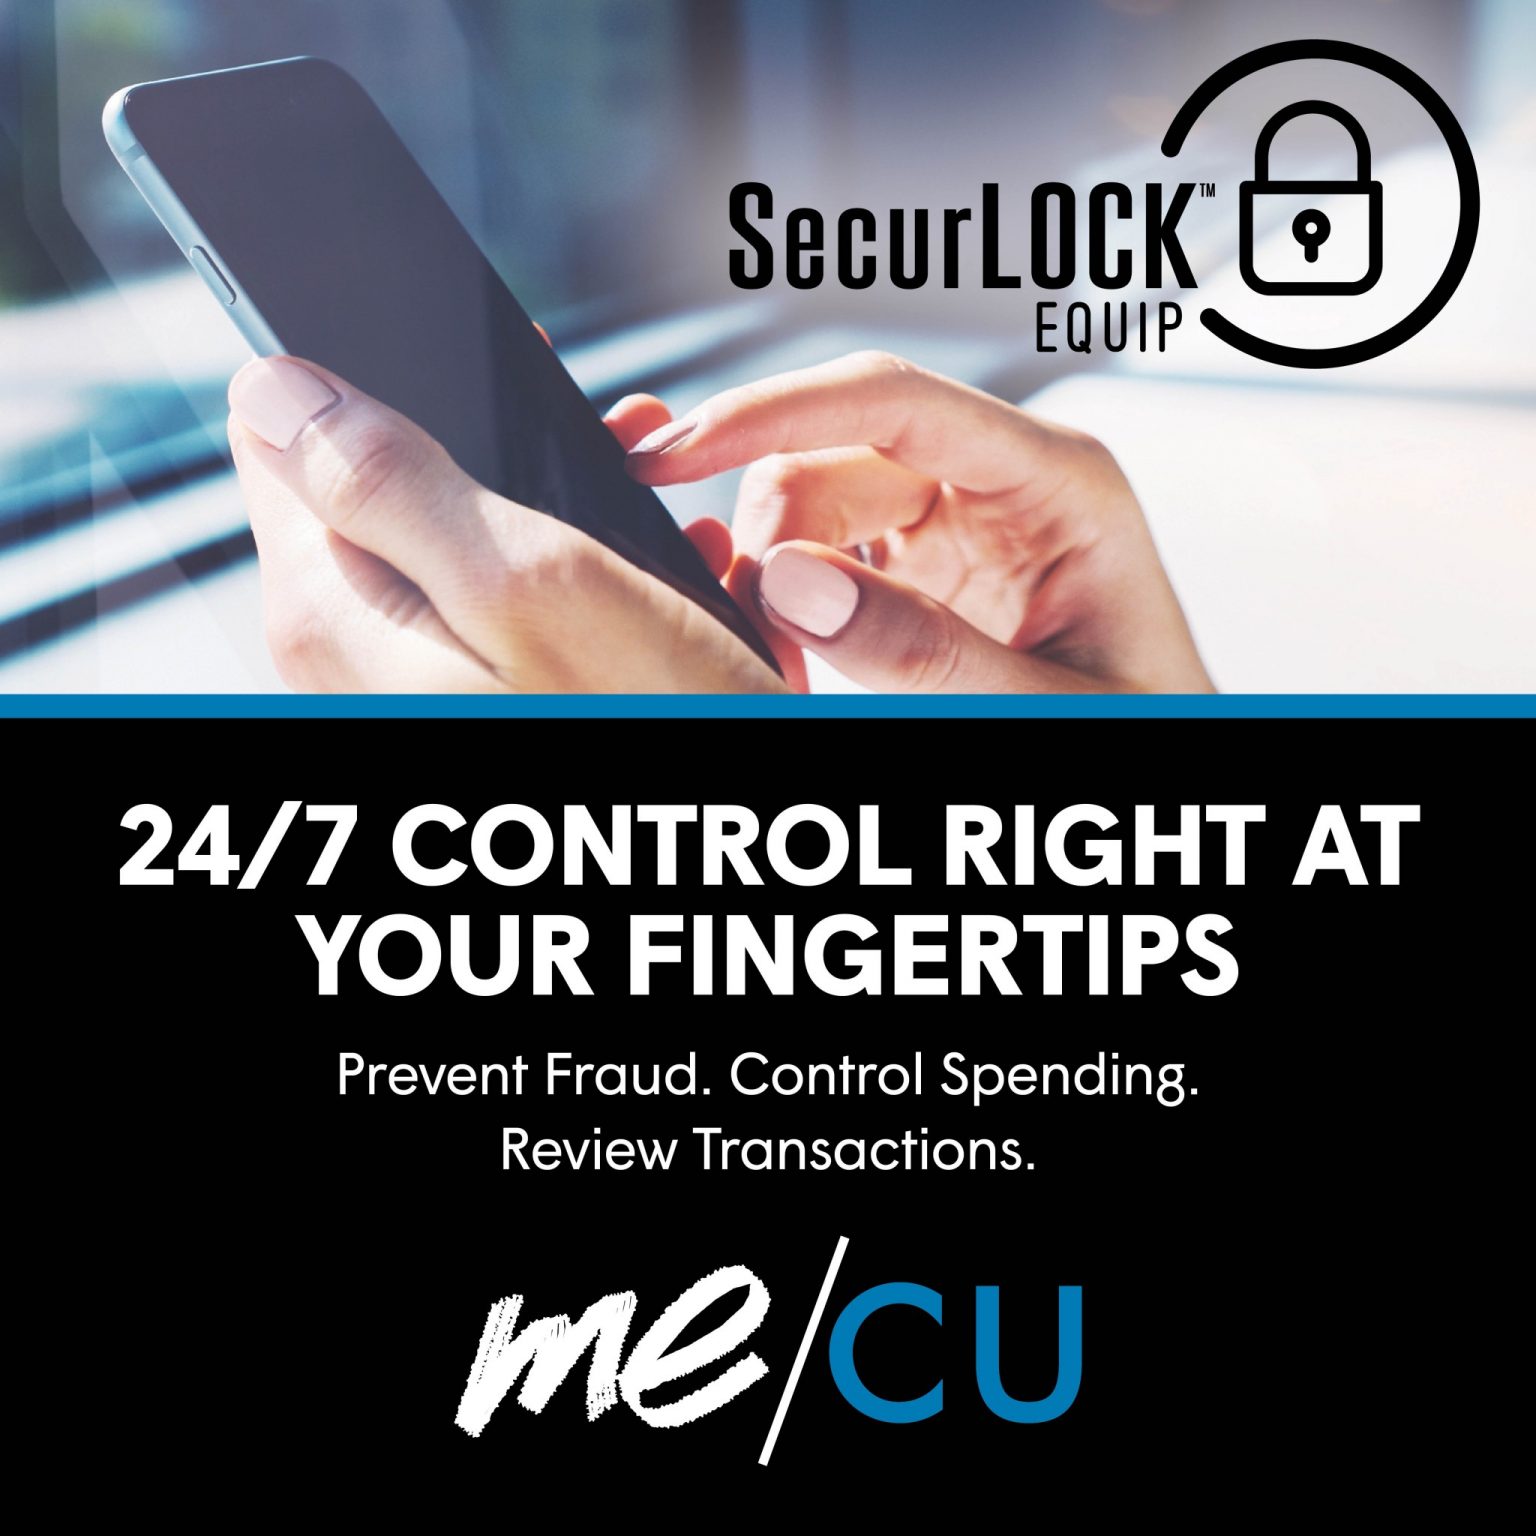 securlock 24/7 account control right at your fingertips